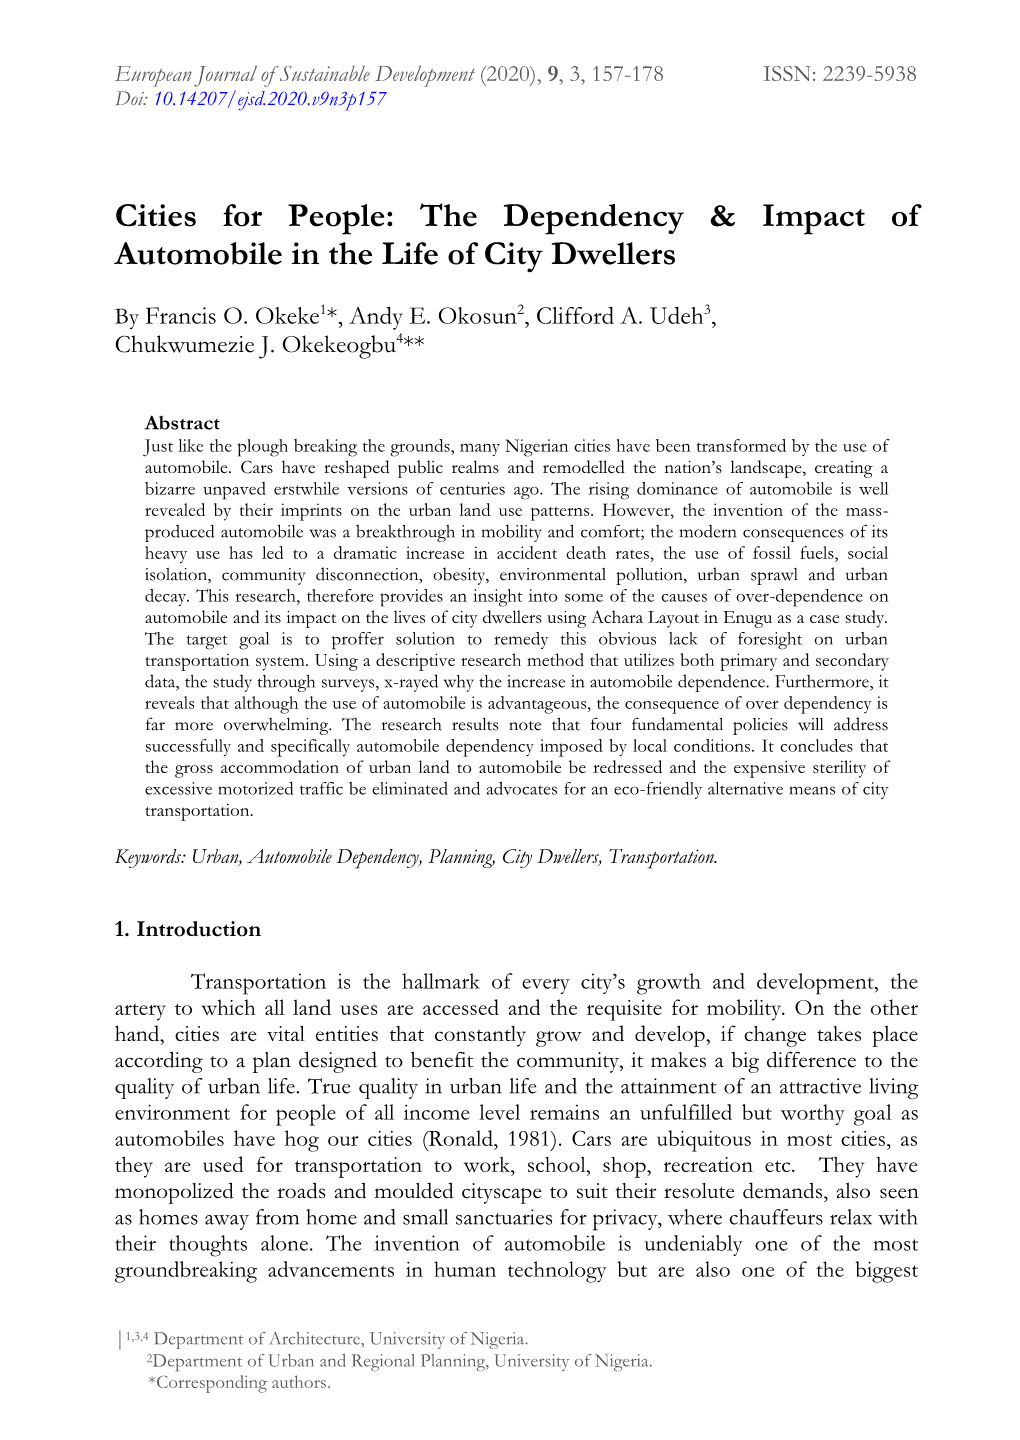 The Dependency & Impact of Automobile in the Life of City Dwellers